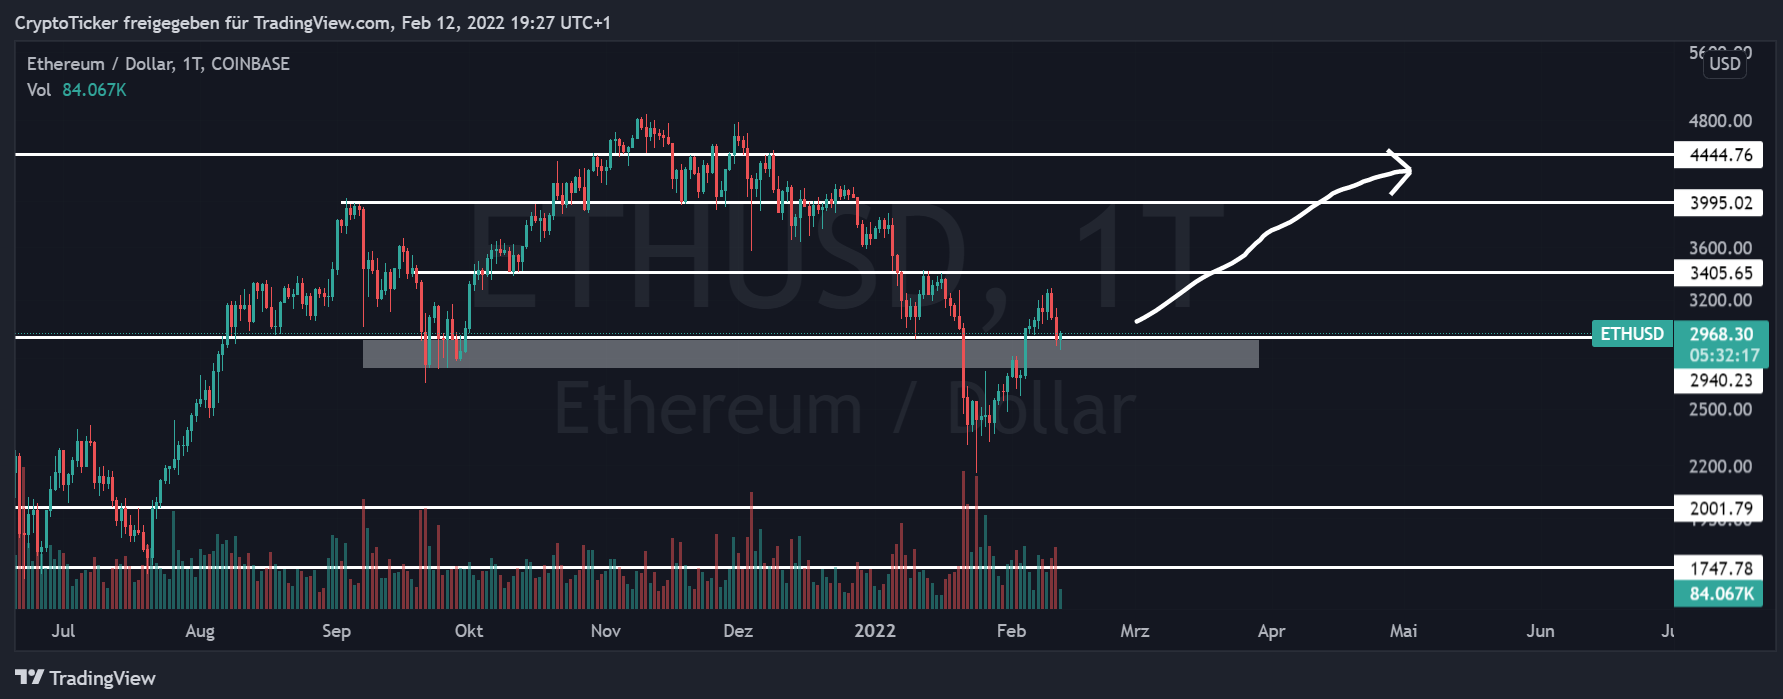 ETH/USD 1-day chart showing the different targets of ETH